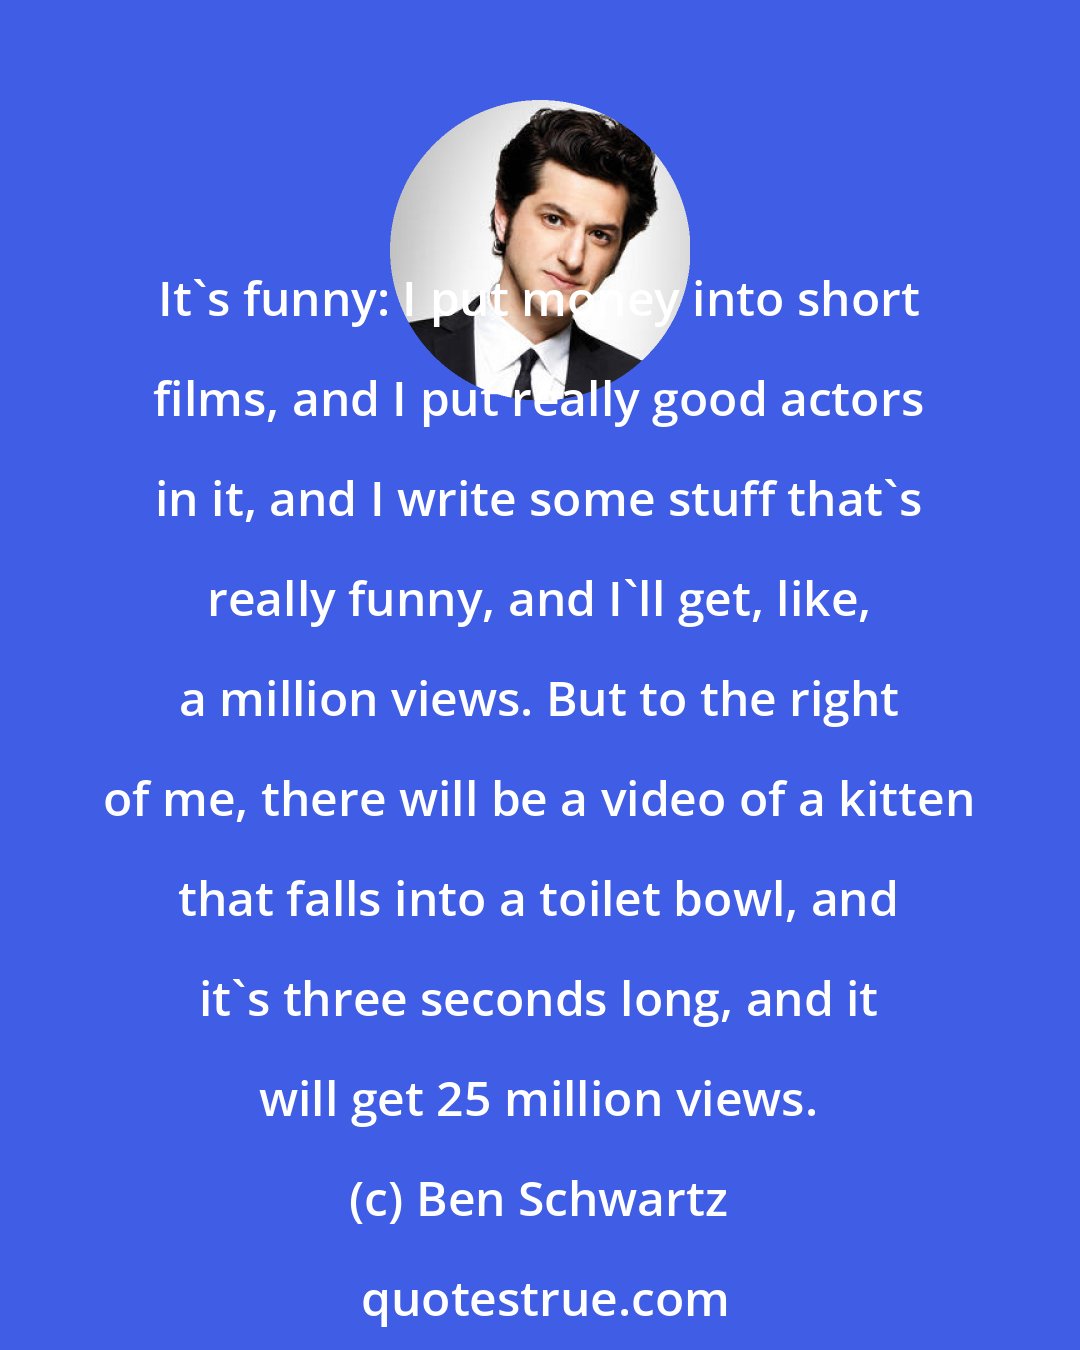 Ben Schwartz: It's funny: I put money into short films, and I put really good actors in it, and I write some stuff that's really funny, and I'll get, like, a million views. But to the right of me, there will be a video of a kitten that falls into a toilet bowl, and it's three seconds long, and it will get 25 million views.